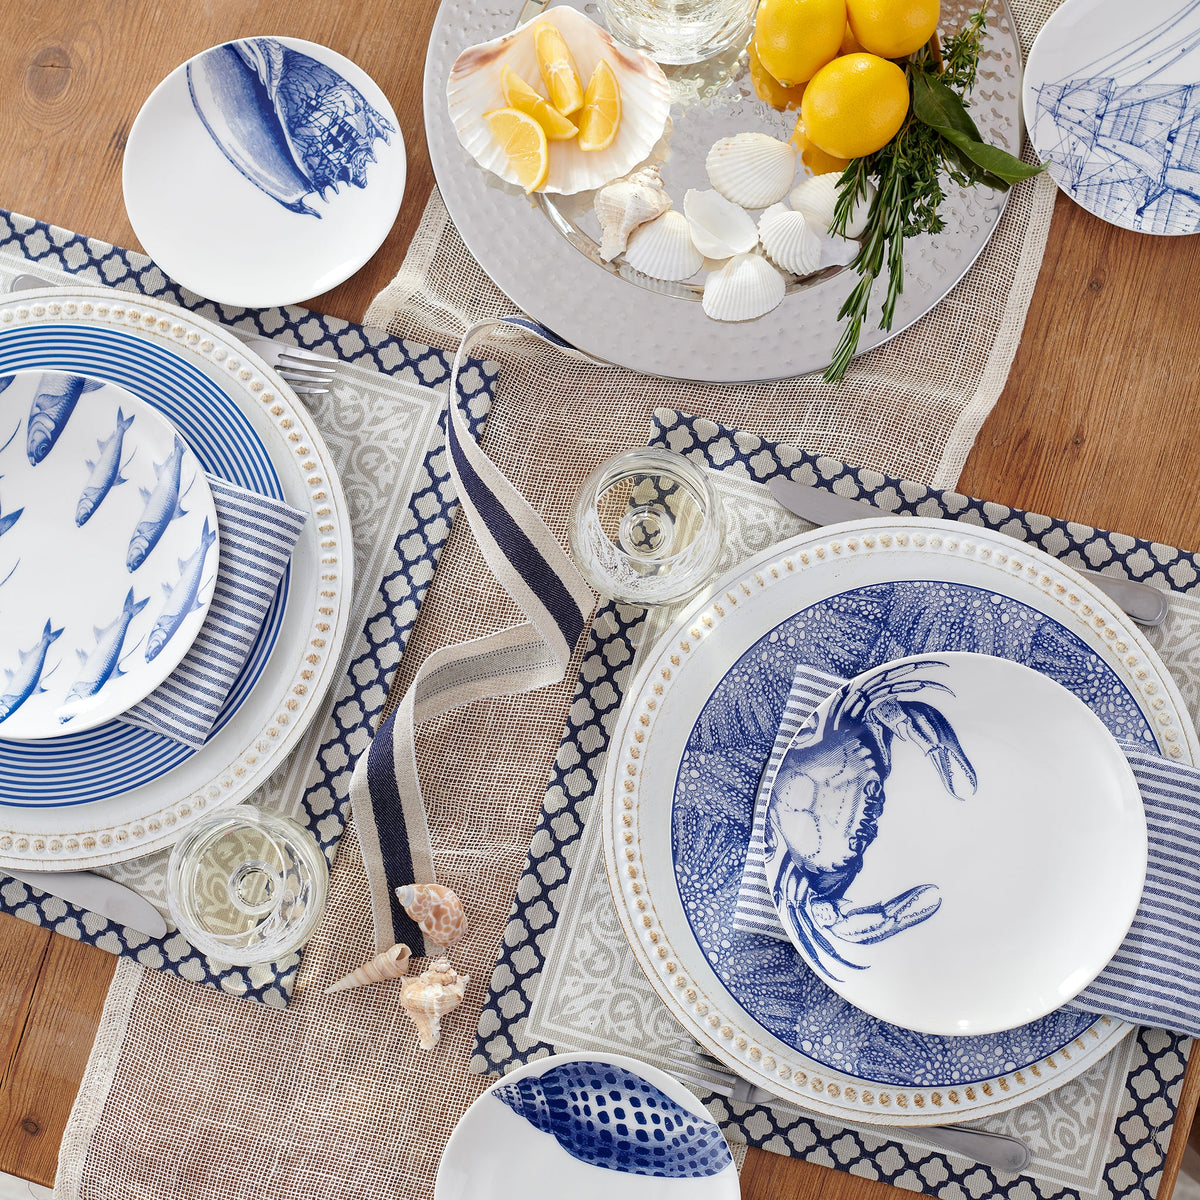 A wooden table set with coastal-themed Crab Coupe Salad Plates by Caskata Artisanal Home featuring premium porcelain and a charming crab pattern, surrounded by sea shells, lemons, and glasses, arranged on a mesh table runner.